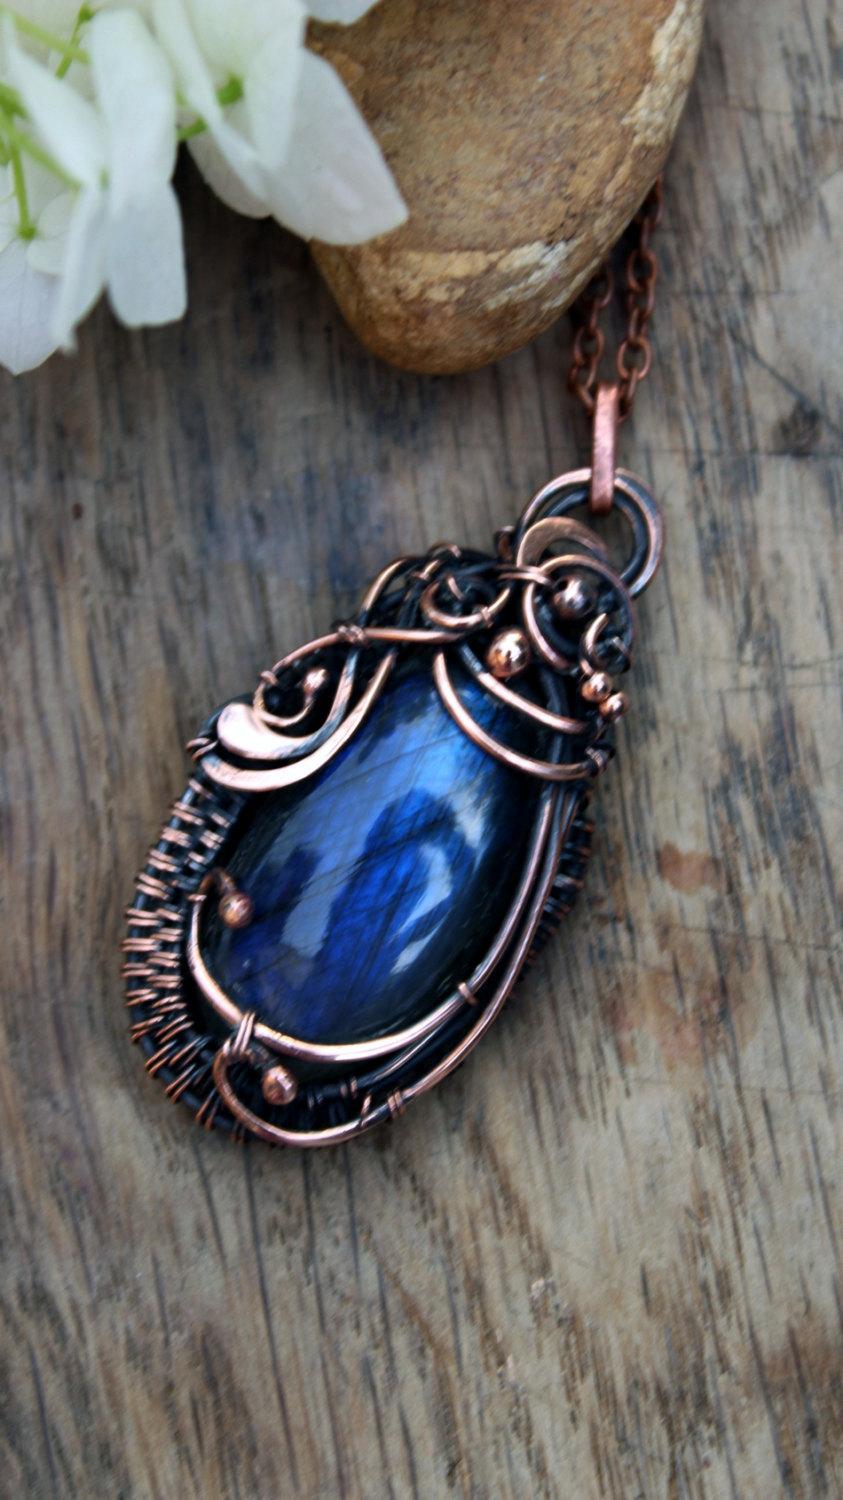 Wedding - Labradorite Pendant Wire wrapped pendant Copper pendant necklace Inspirational necklace Wife gift for her Wire necklace stone pendant